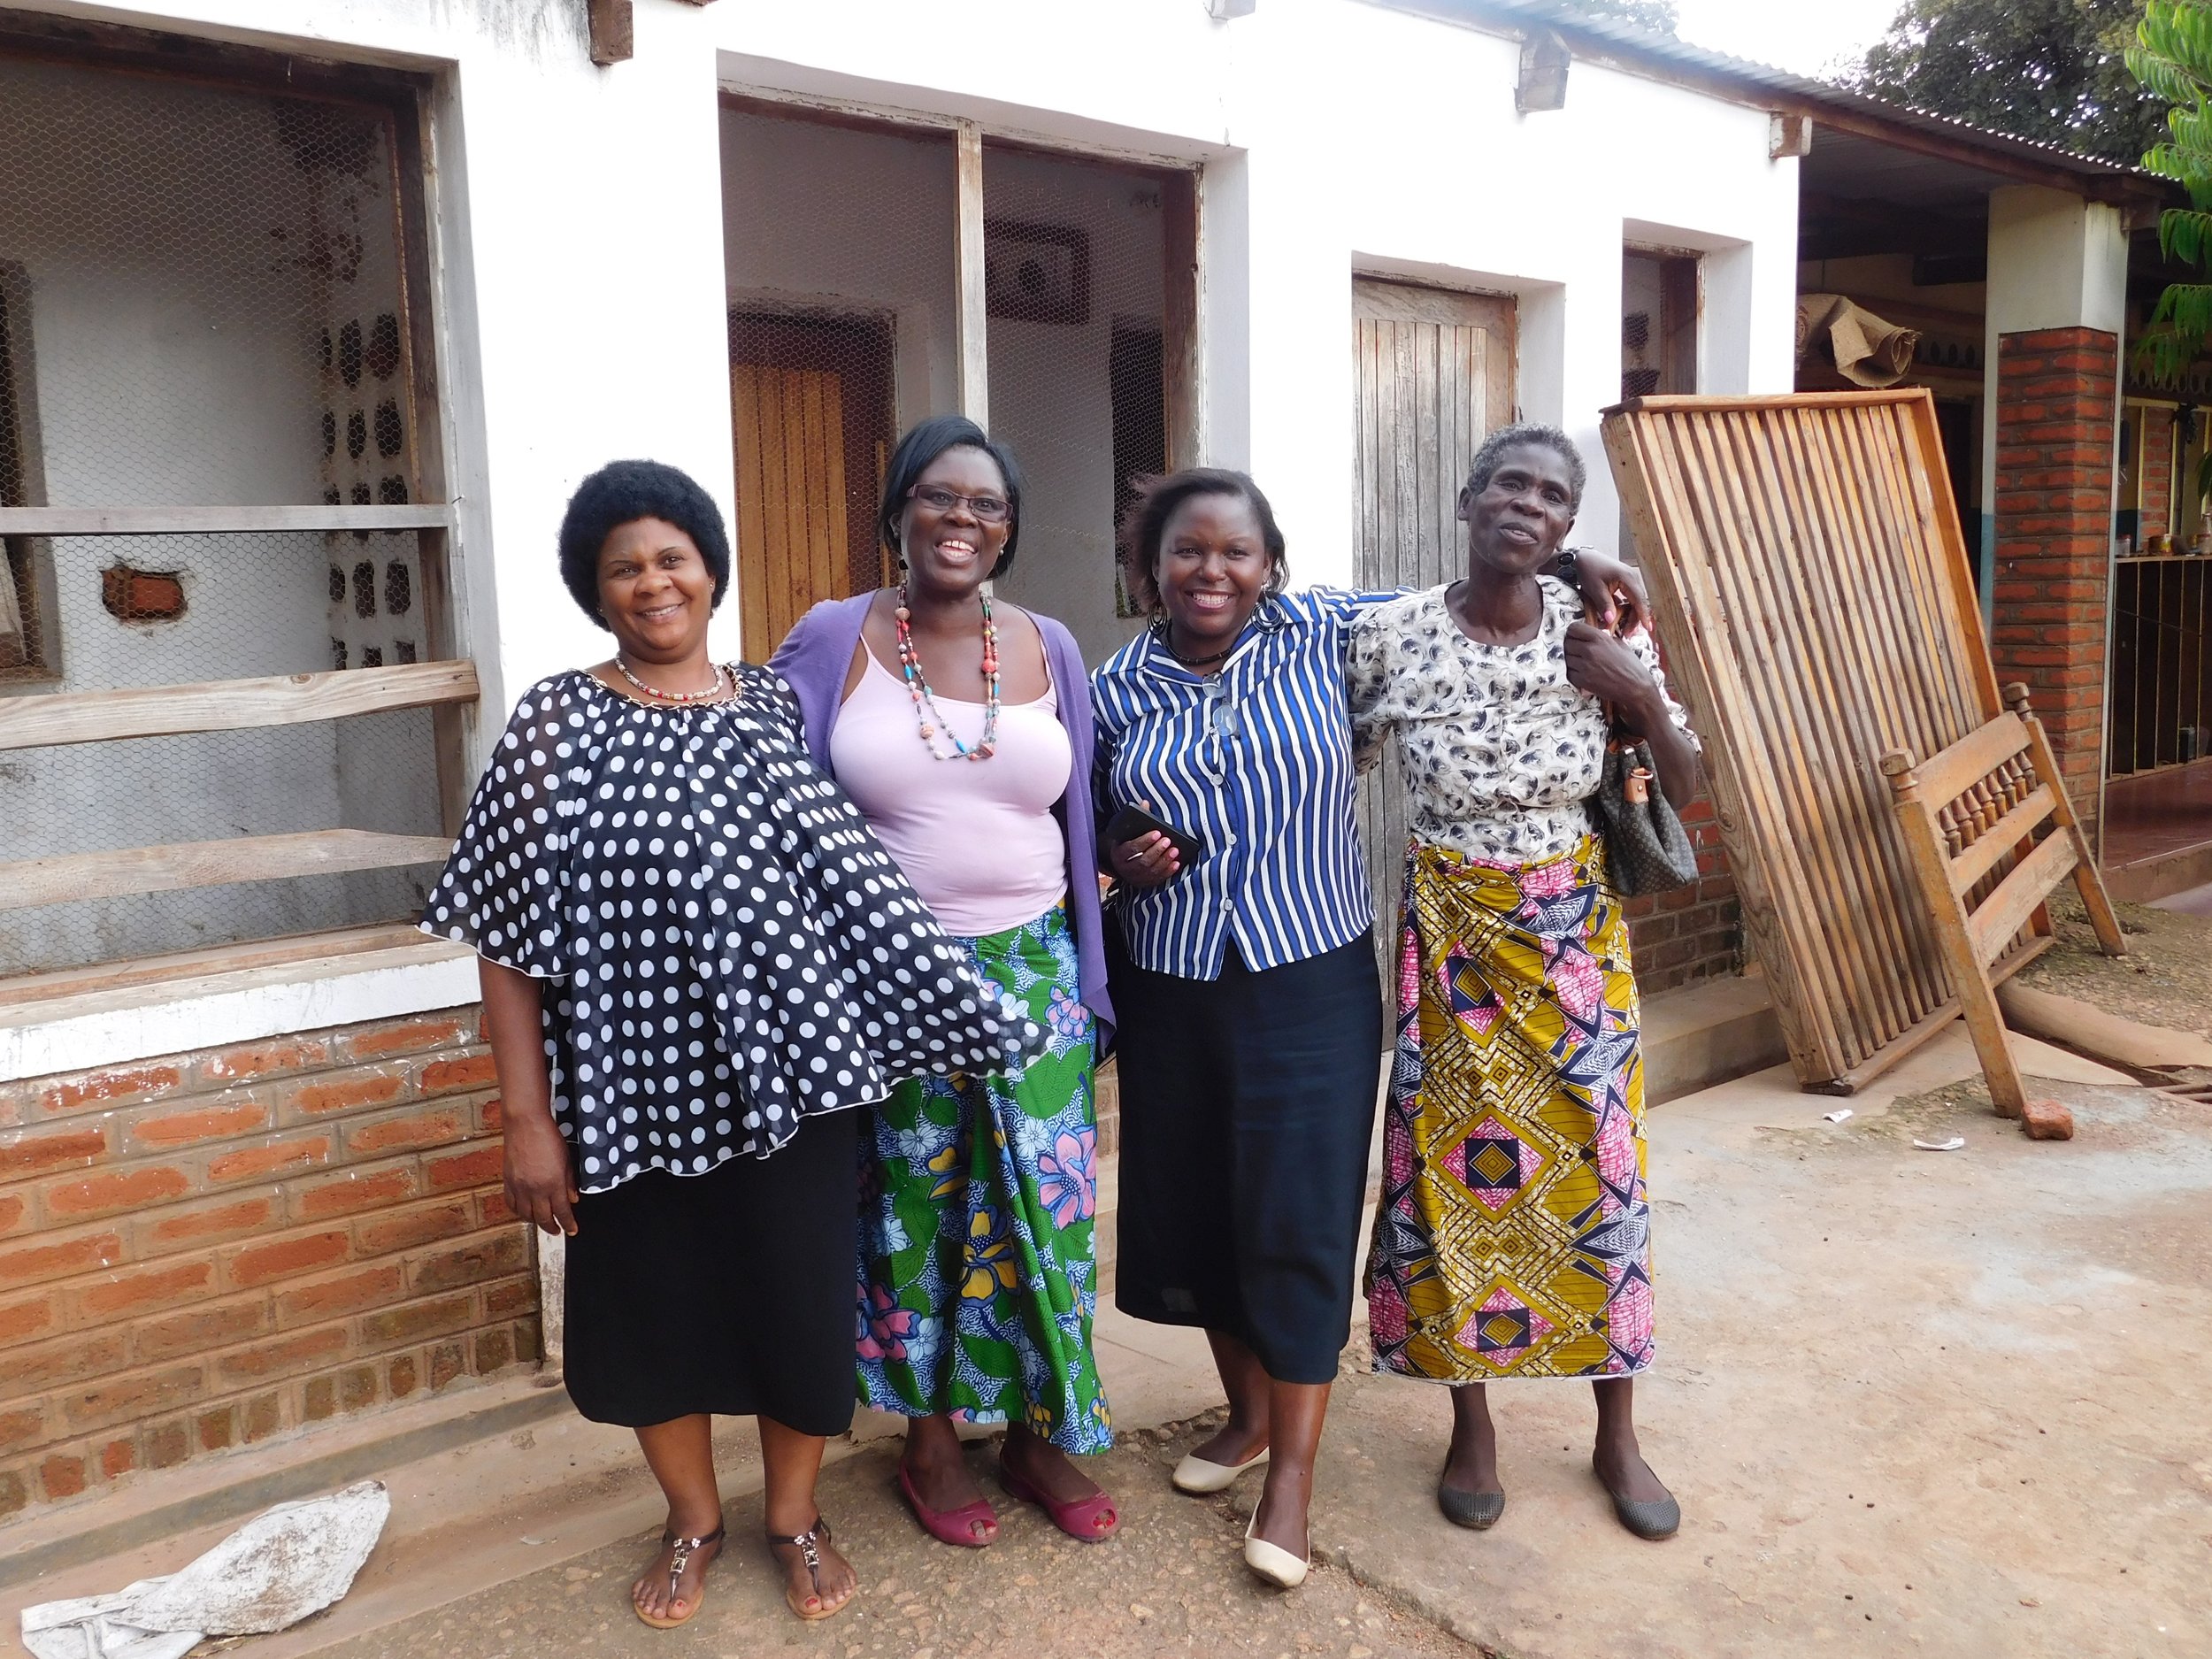  The women of Chitiipi COMSIP. Chitipi COMSIP is a women-led farm cooperative providing financial production resources to farmers so that they can gain financial independence, social capital, and the confidence to know they can succeed. Its founder, 